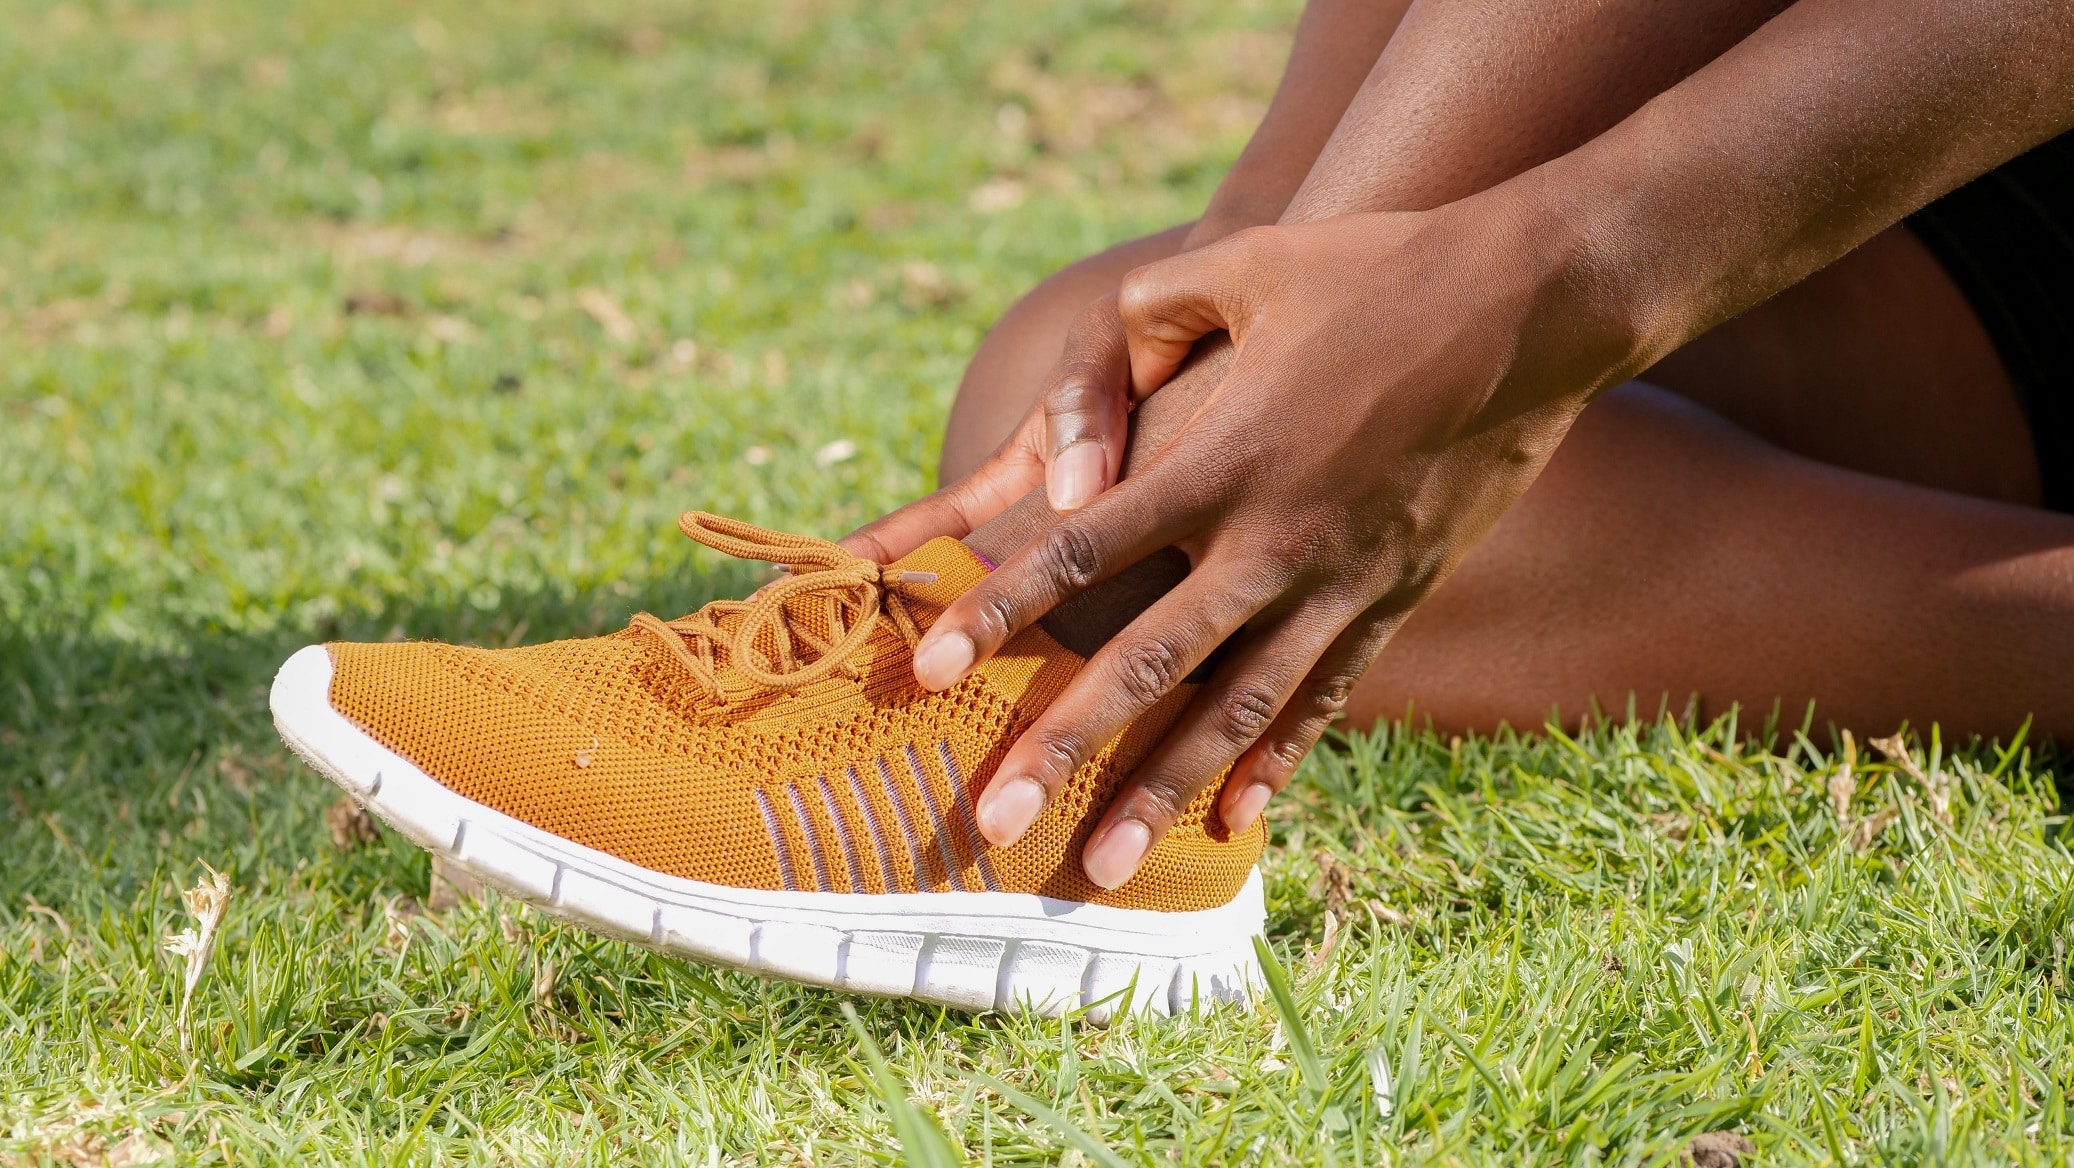 Close up image of a person sitting in the grass, wearing dark yellow running sneakers and grasping their left ankle, contemplating sprained ankle heal time.